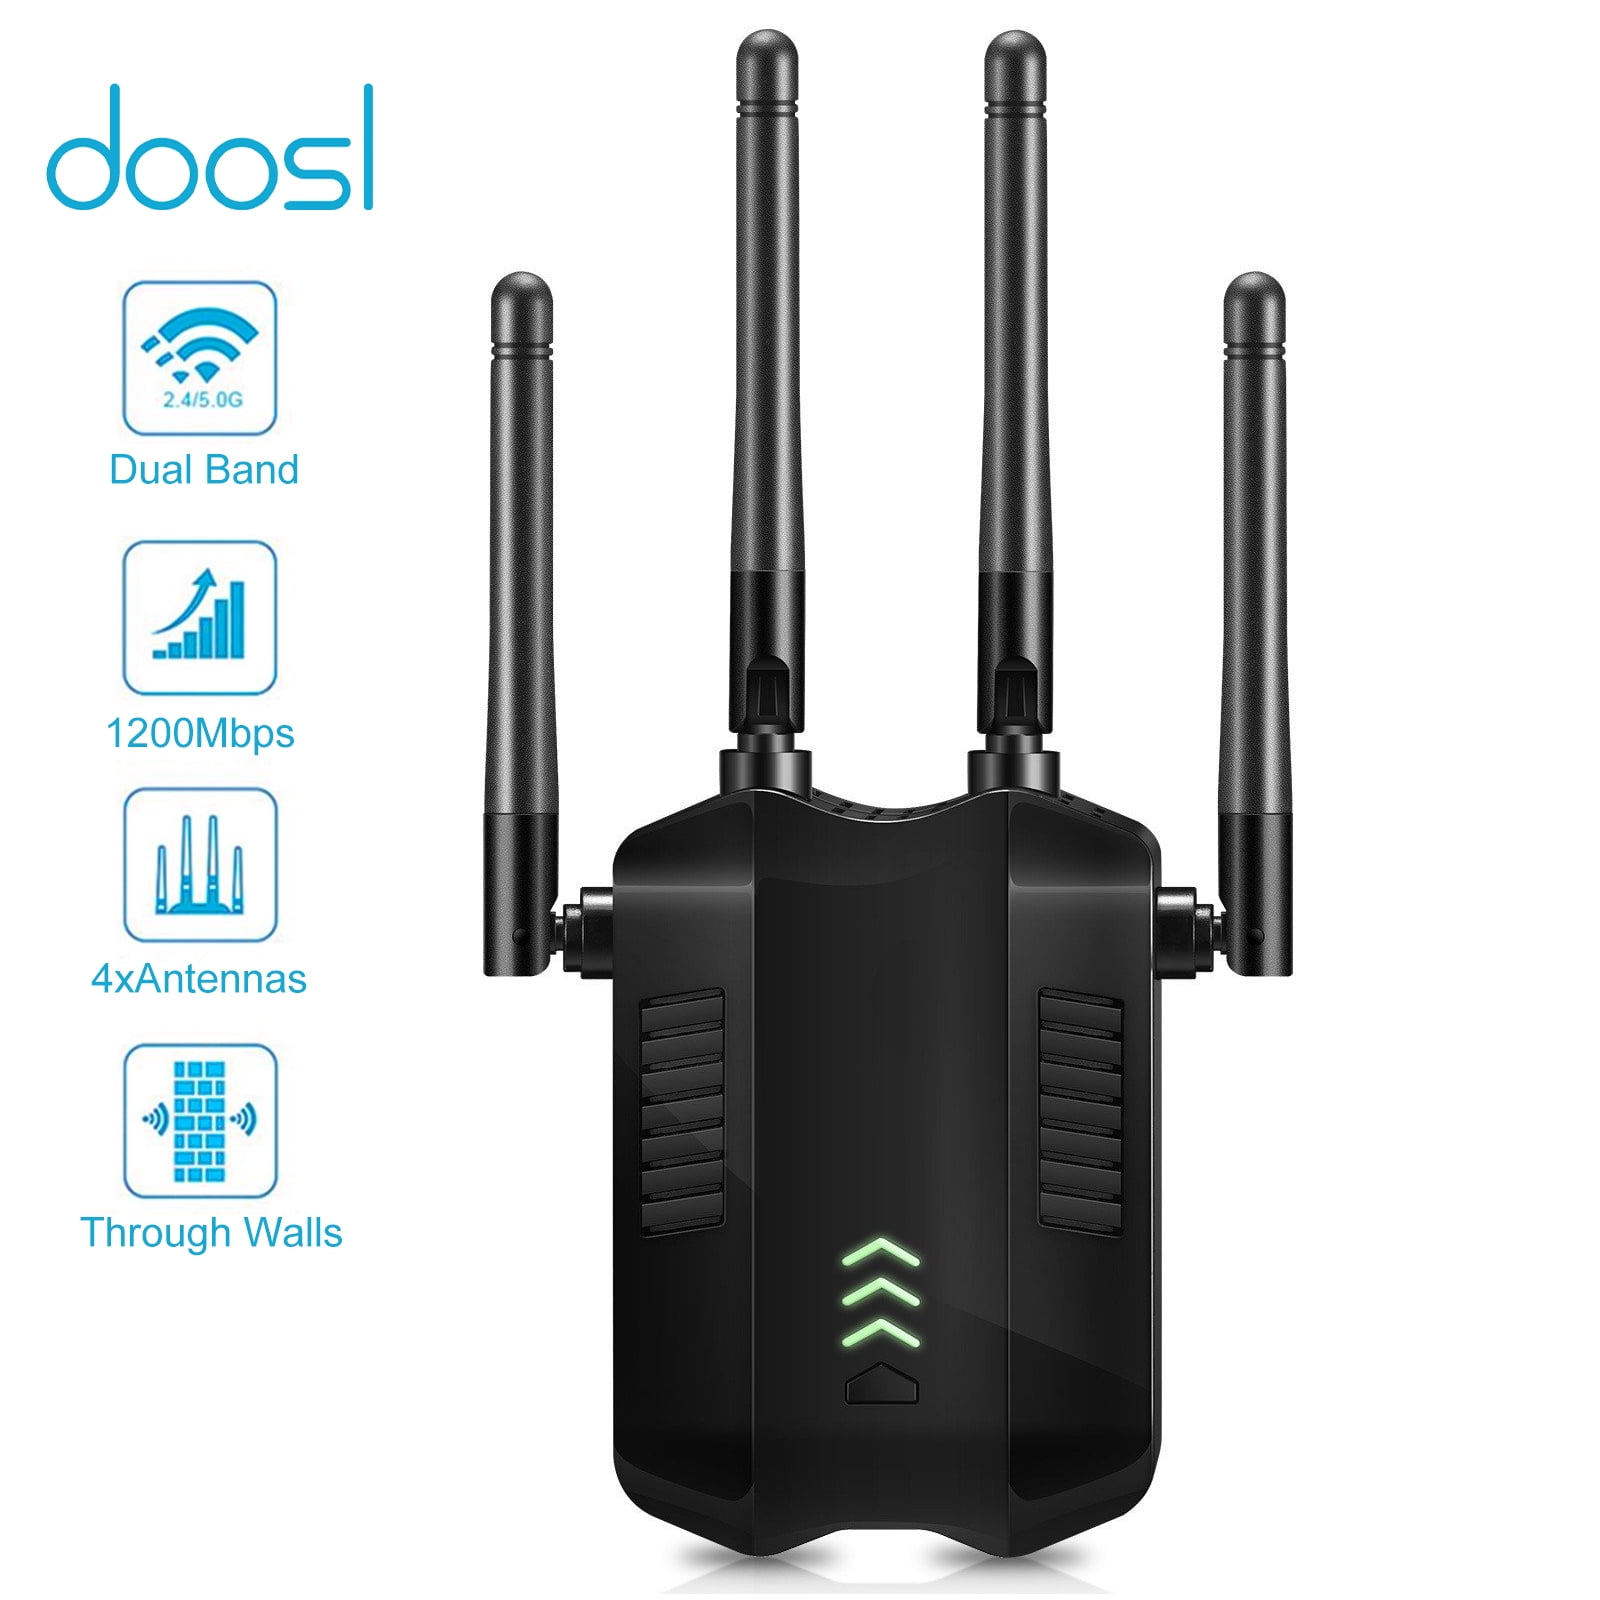 Range Extender, 1200Mbps Signal Booster Repeater Cover up to 8000 sq.ft, 2.4 & Dual Band WiFi 4 Antennas 360° Full Coverage Wireless Amplifier for Smart Home Devices - Walmart.com